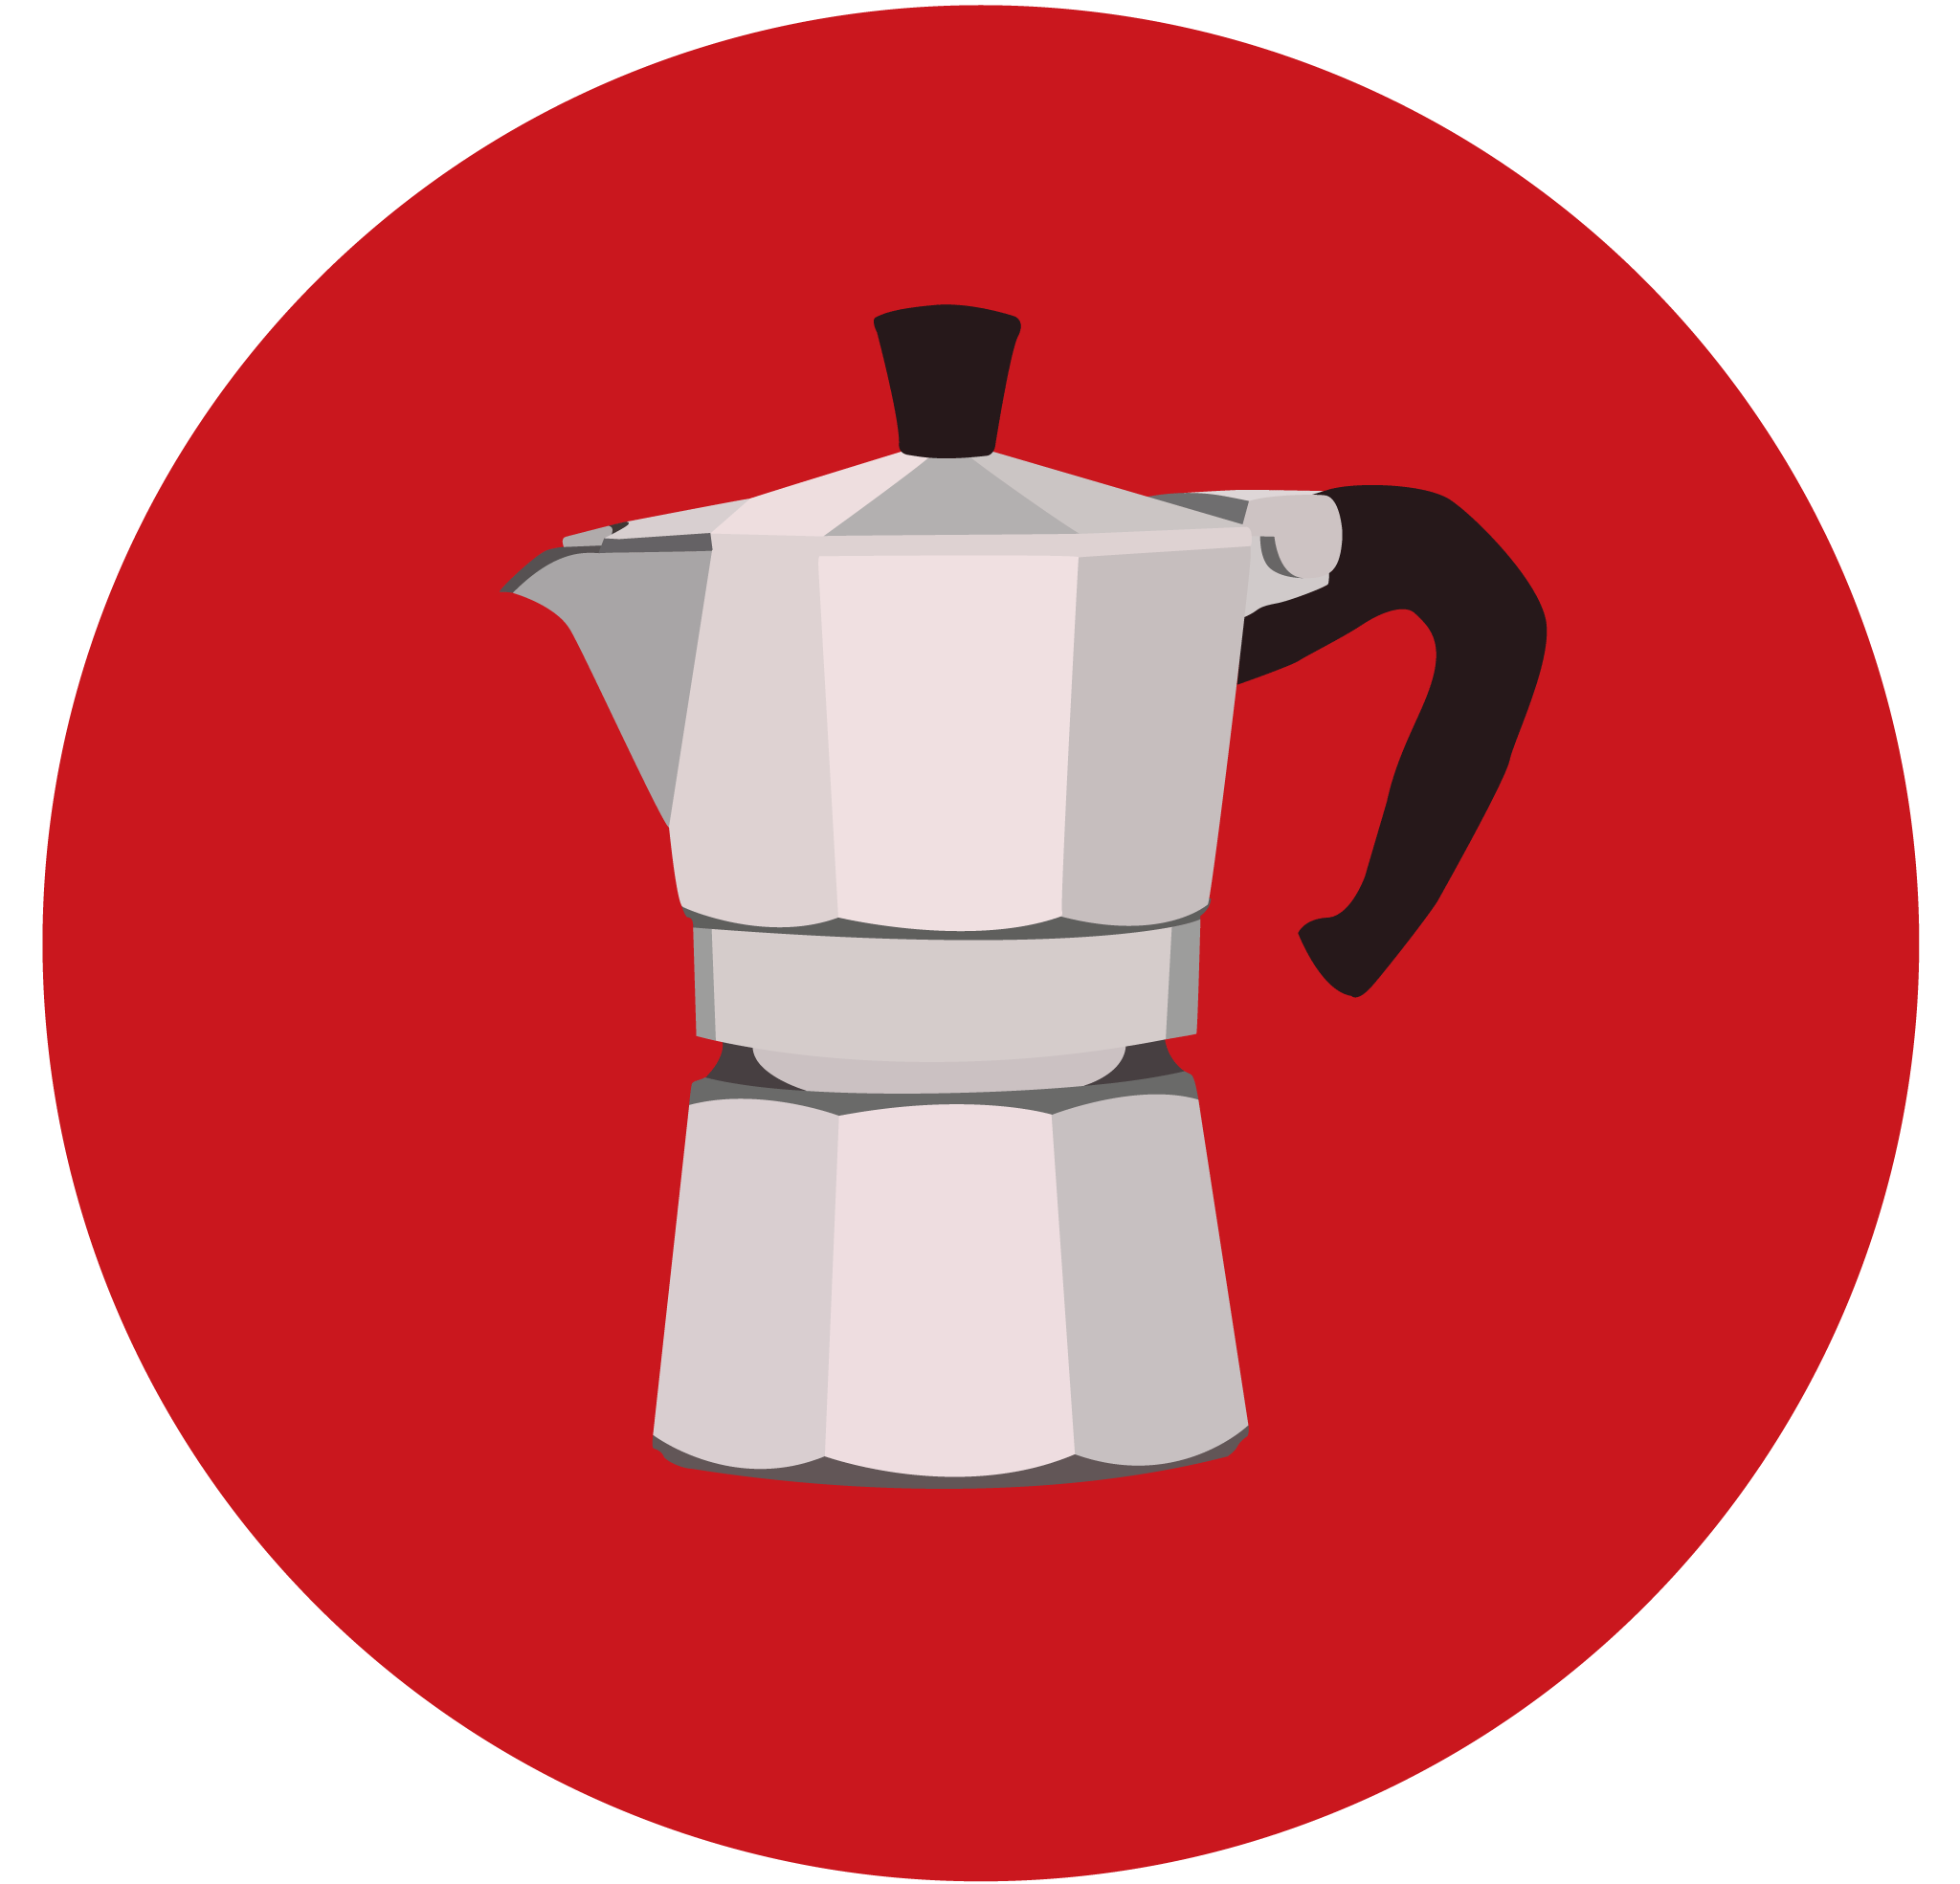 Illustration of a coffee brewer